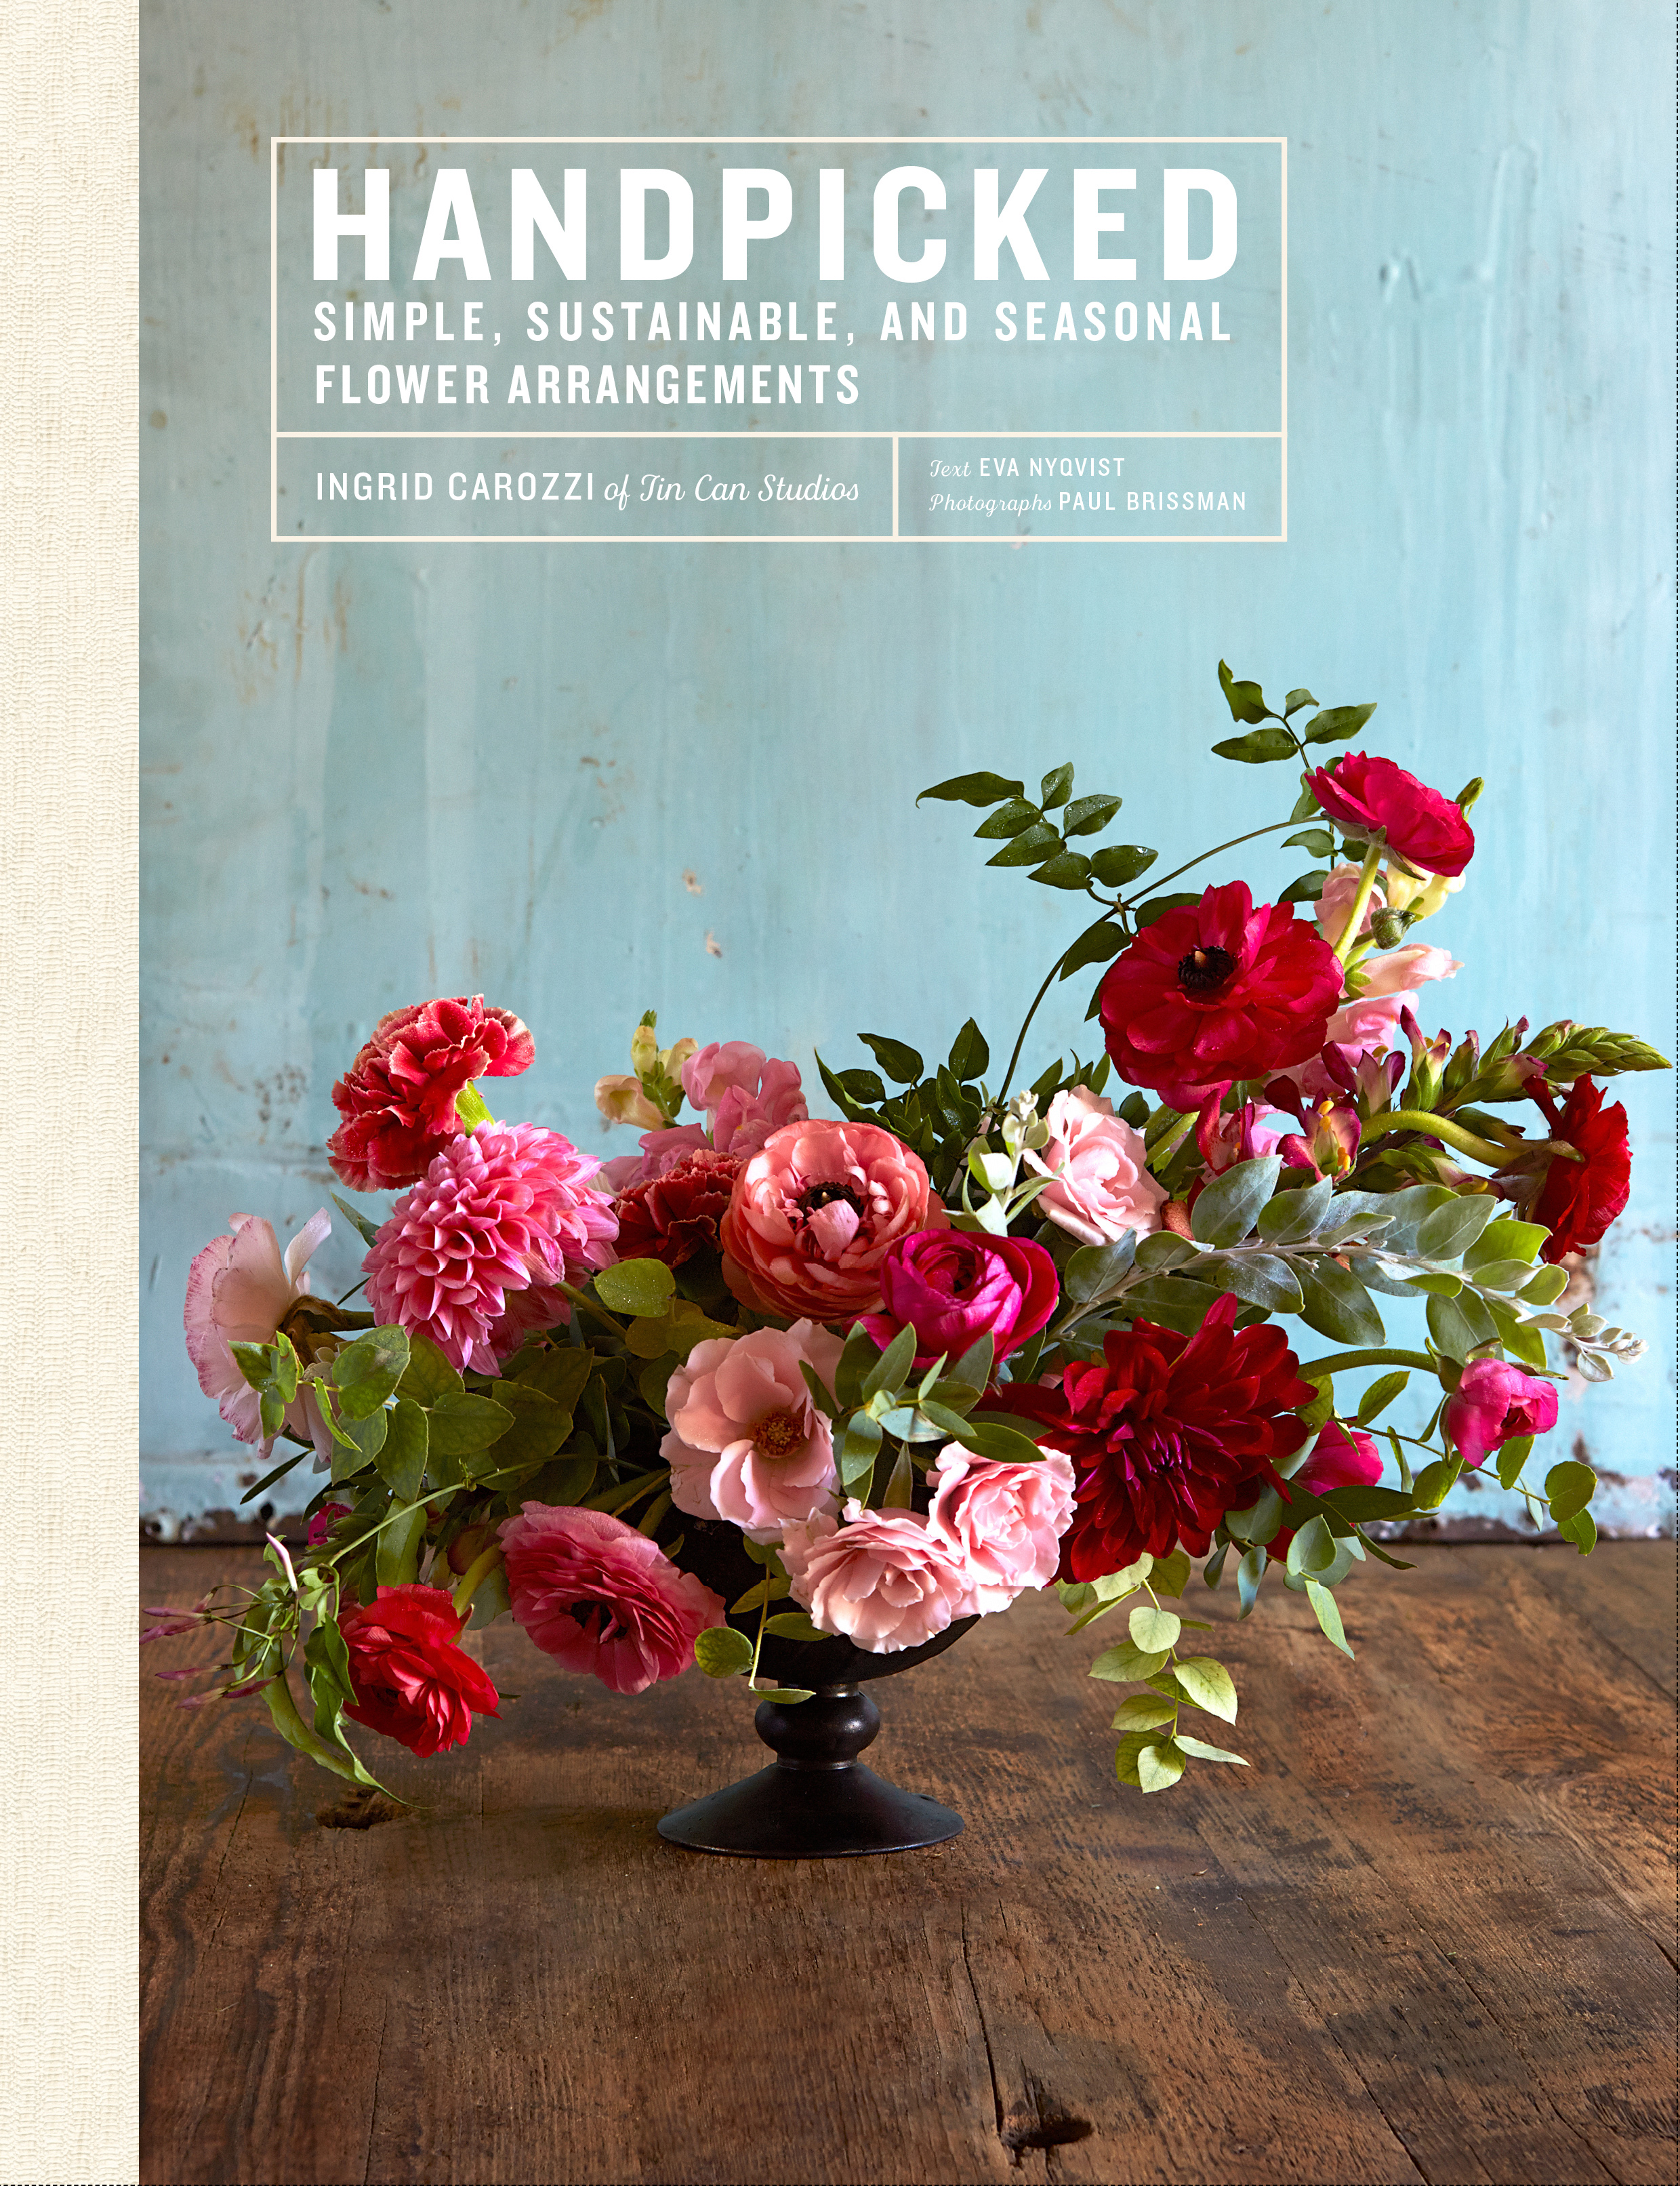 Book Launch: Handpicked: Simple, Sustainable, and Seasonal Flower Arrangements by Ingrid Carozzi